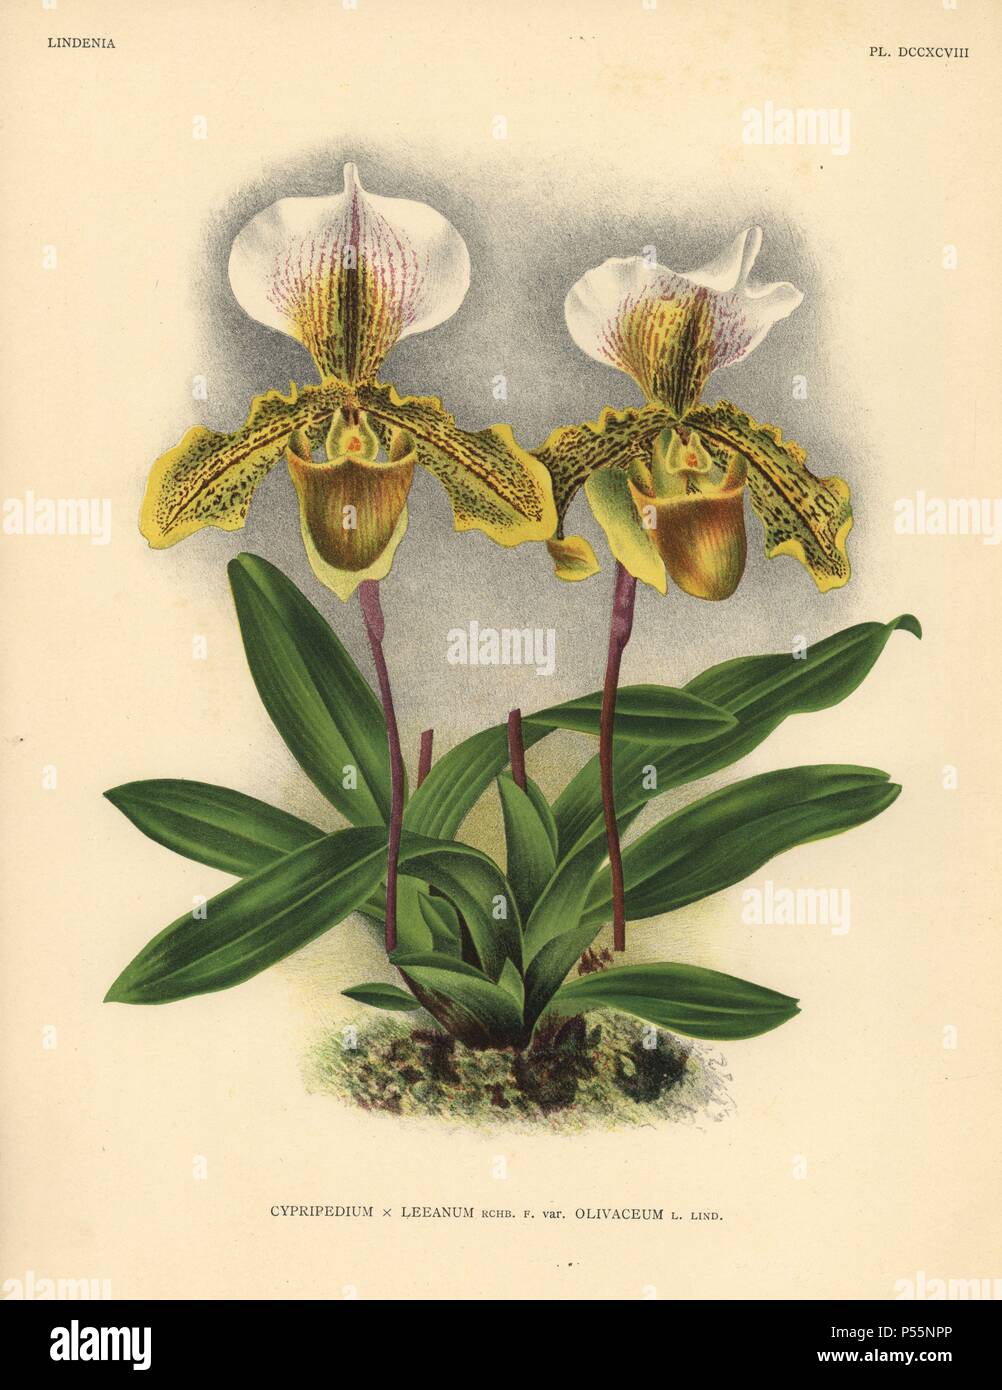 Olicaveum variety of Cypripedium x Leeanum hybrid orchid. Botanical illustration in chromolithograph from Lucien Linden's 'Lindenia, Iconographie des Orchidees,' Brussels, 1903. Stock Photo